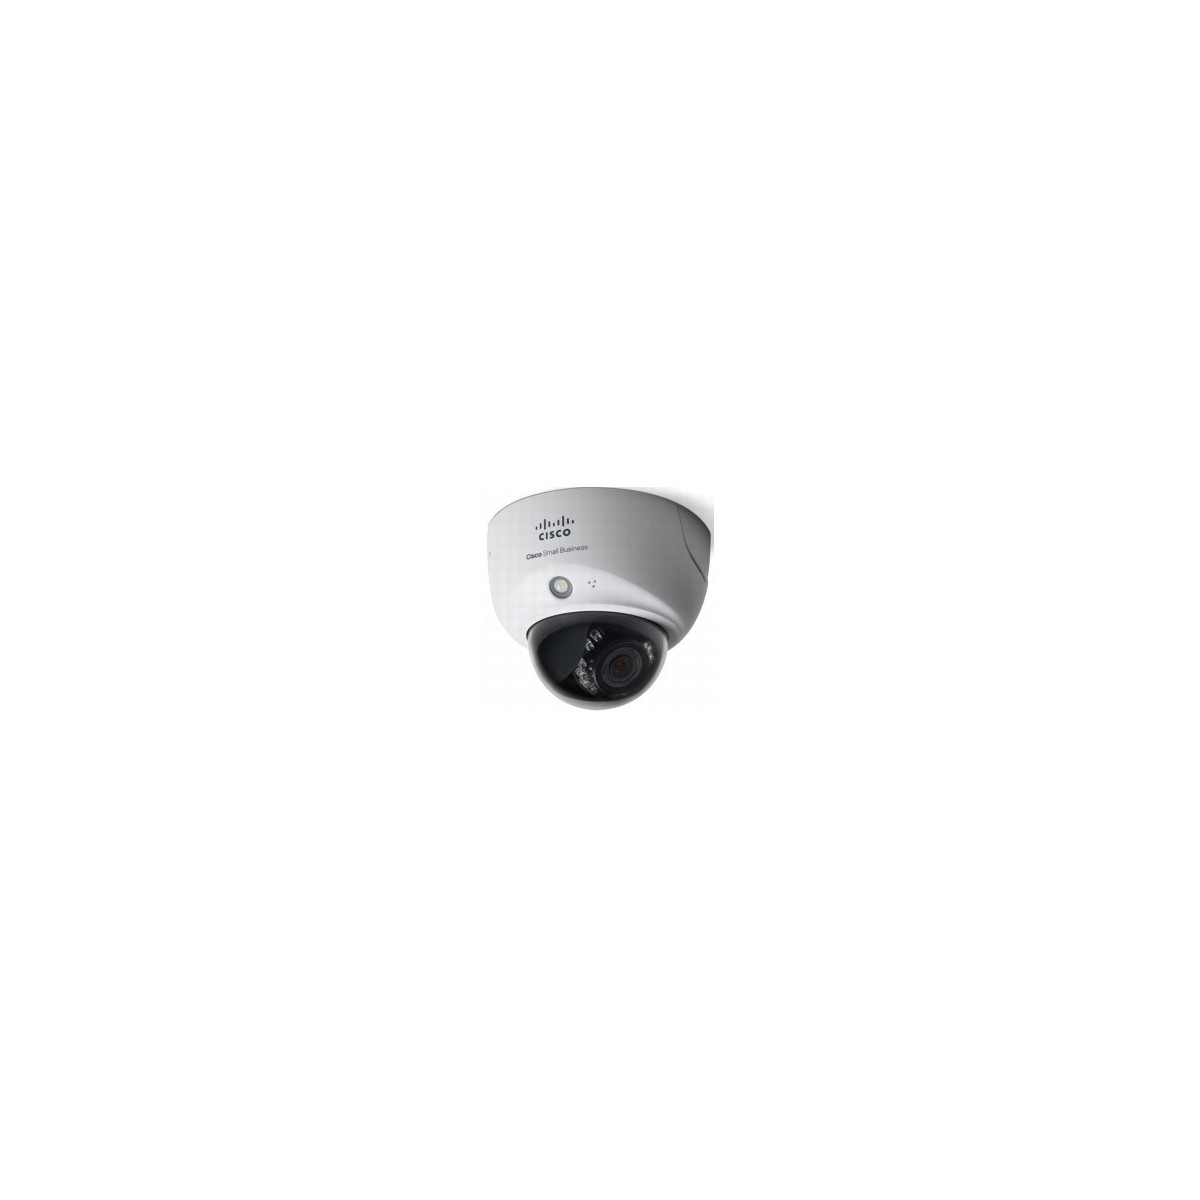 Cisco VC220 - Indoor - Wired - FCC - CE - UL - EMC/EMI - GOST-R - Dome - Ceiling - White